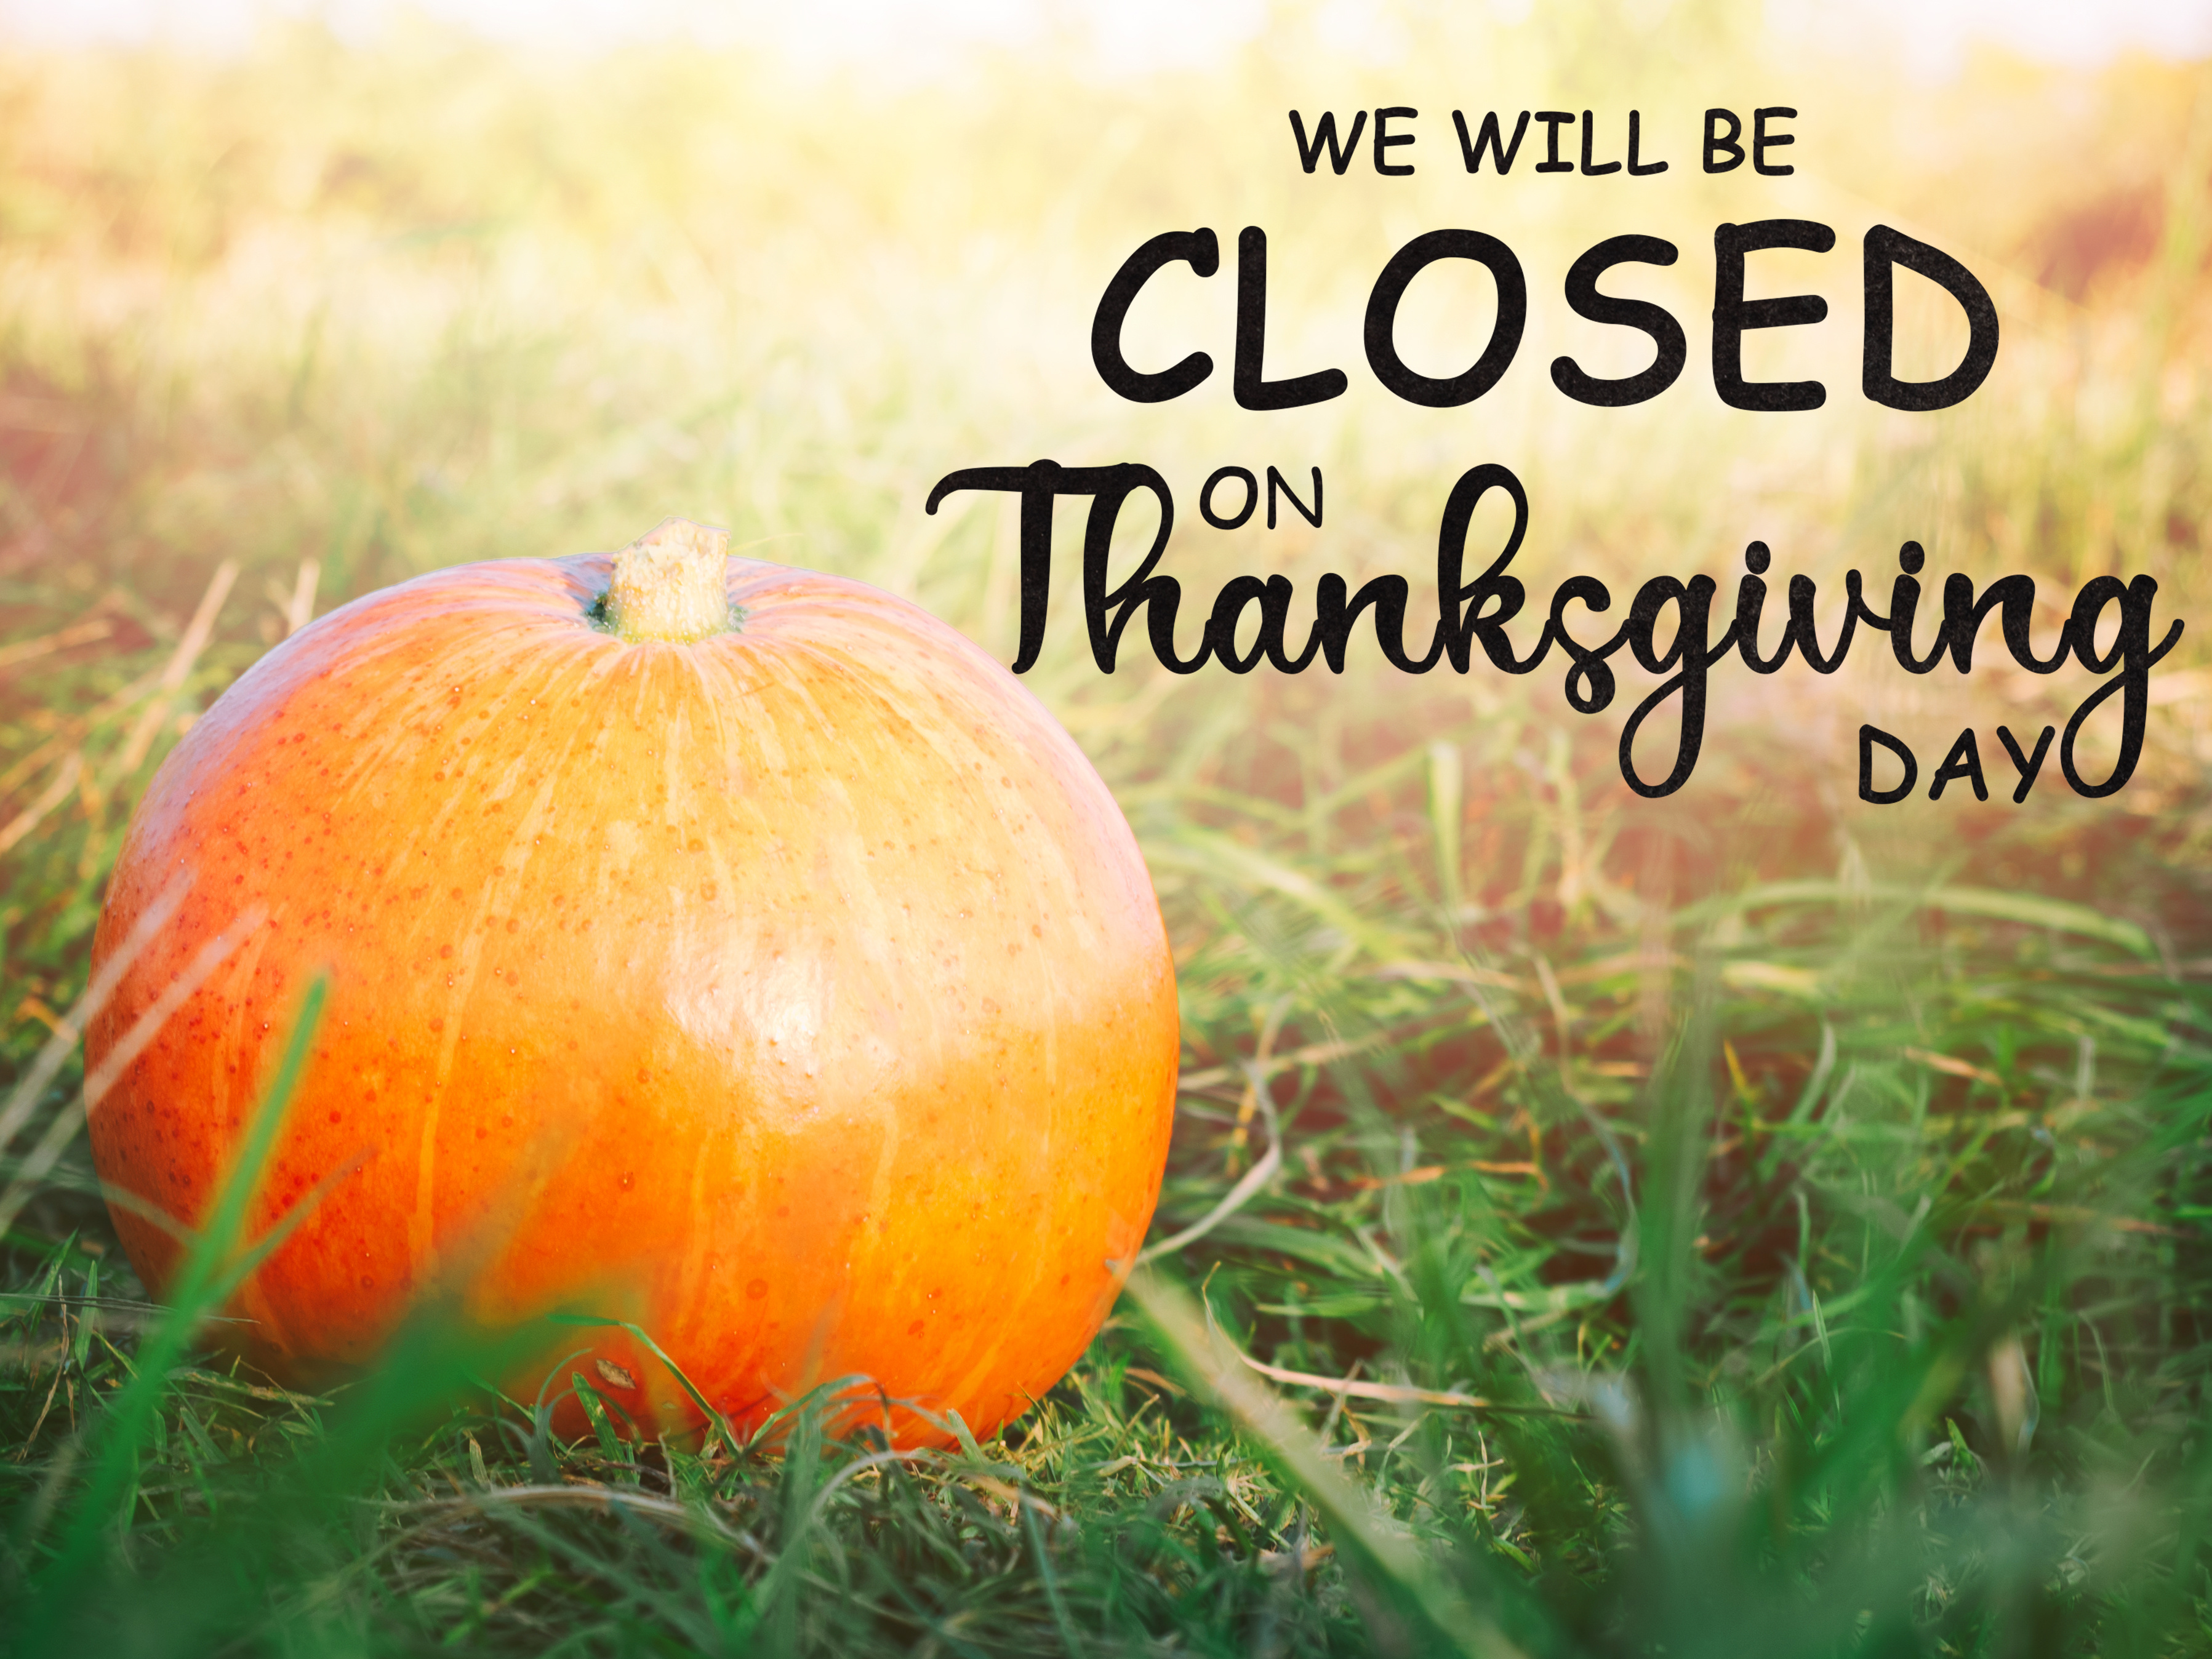 McMillan Library closed on Thanksgiving